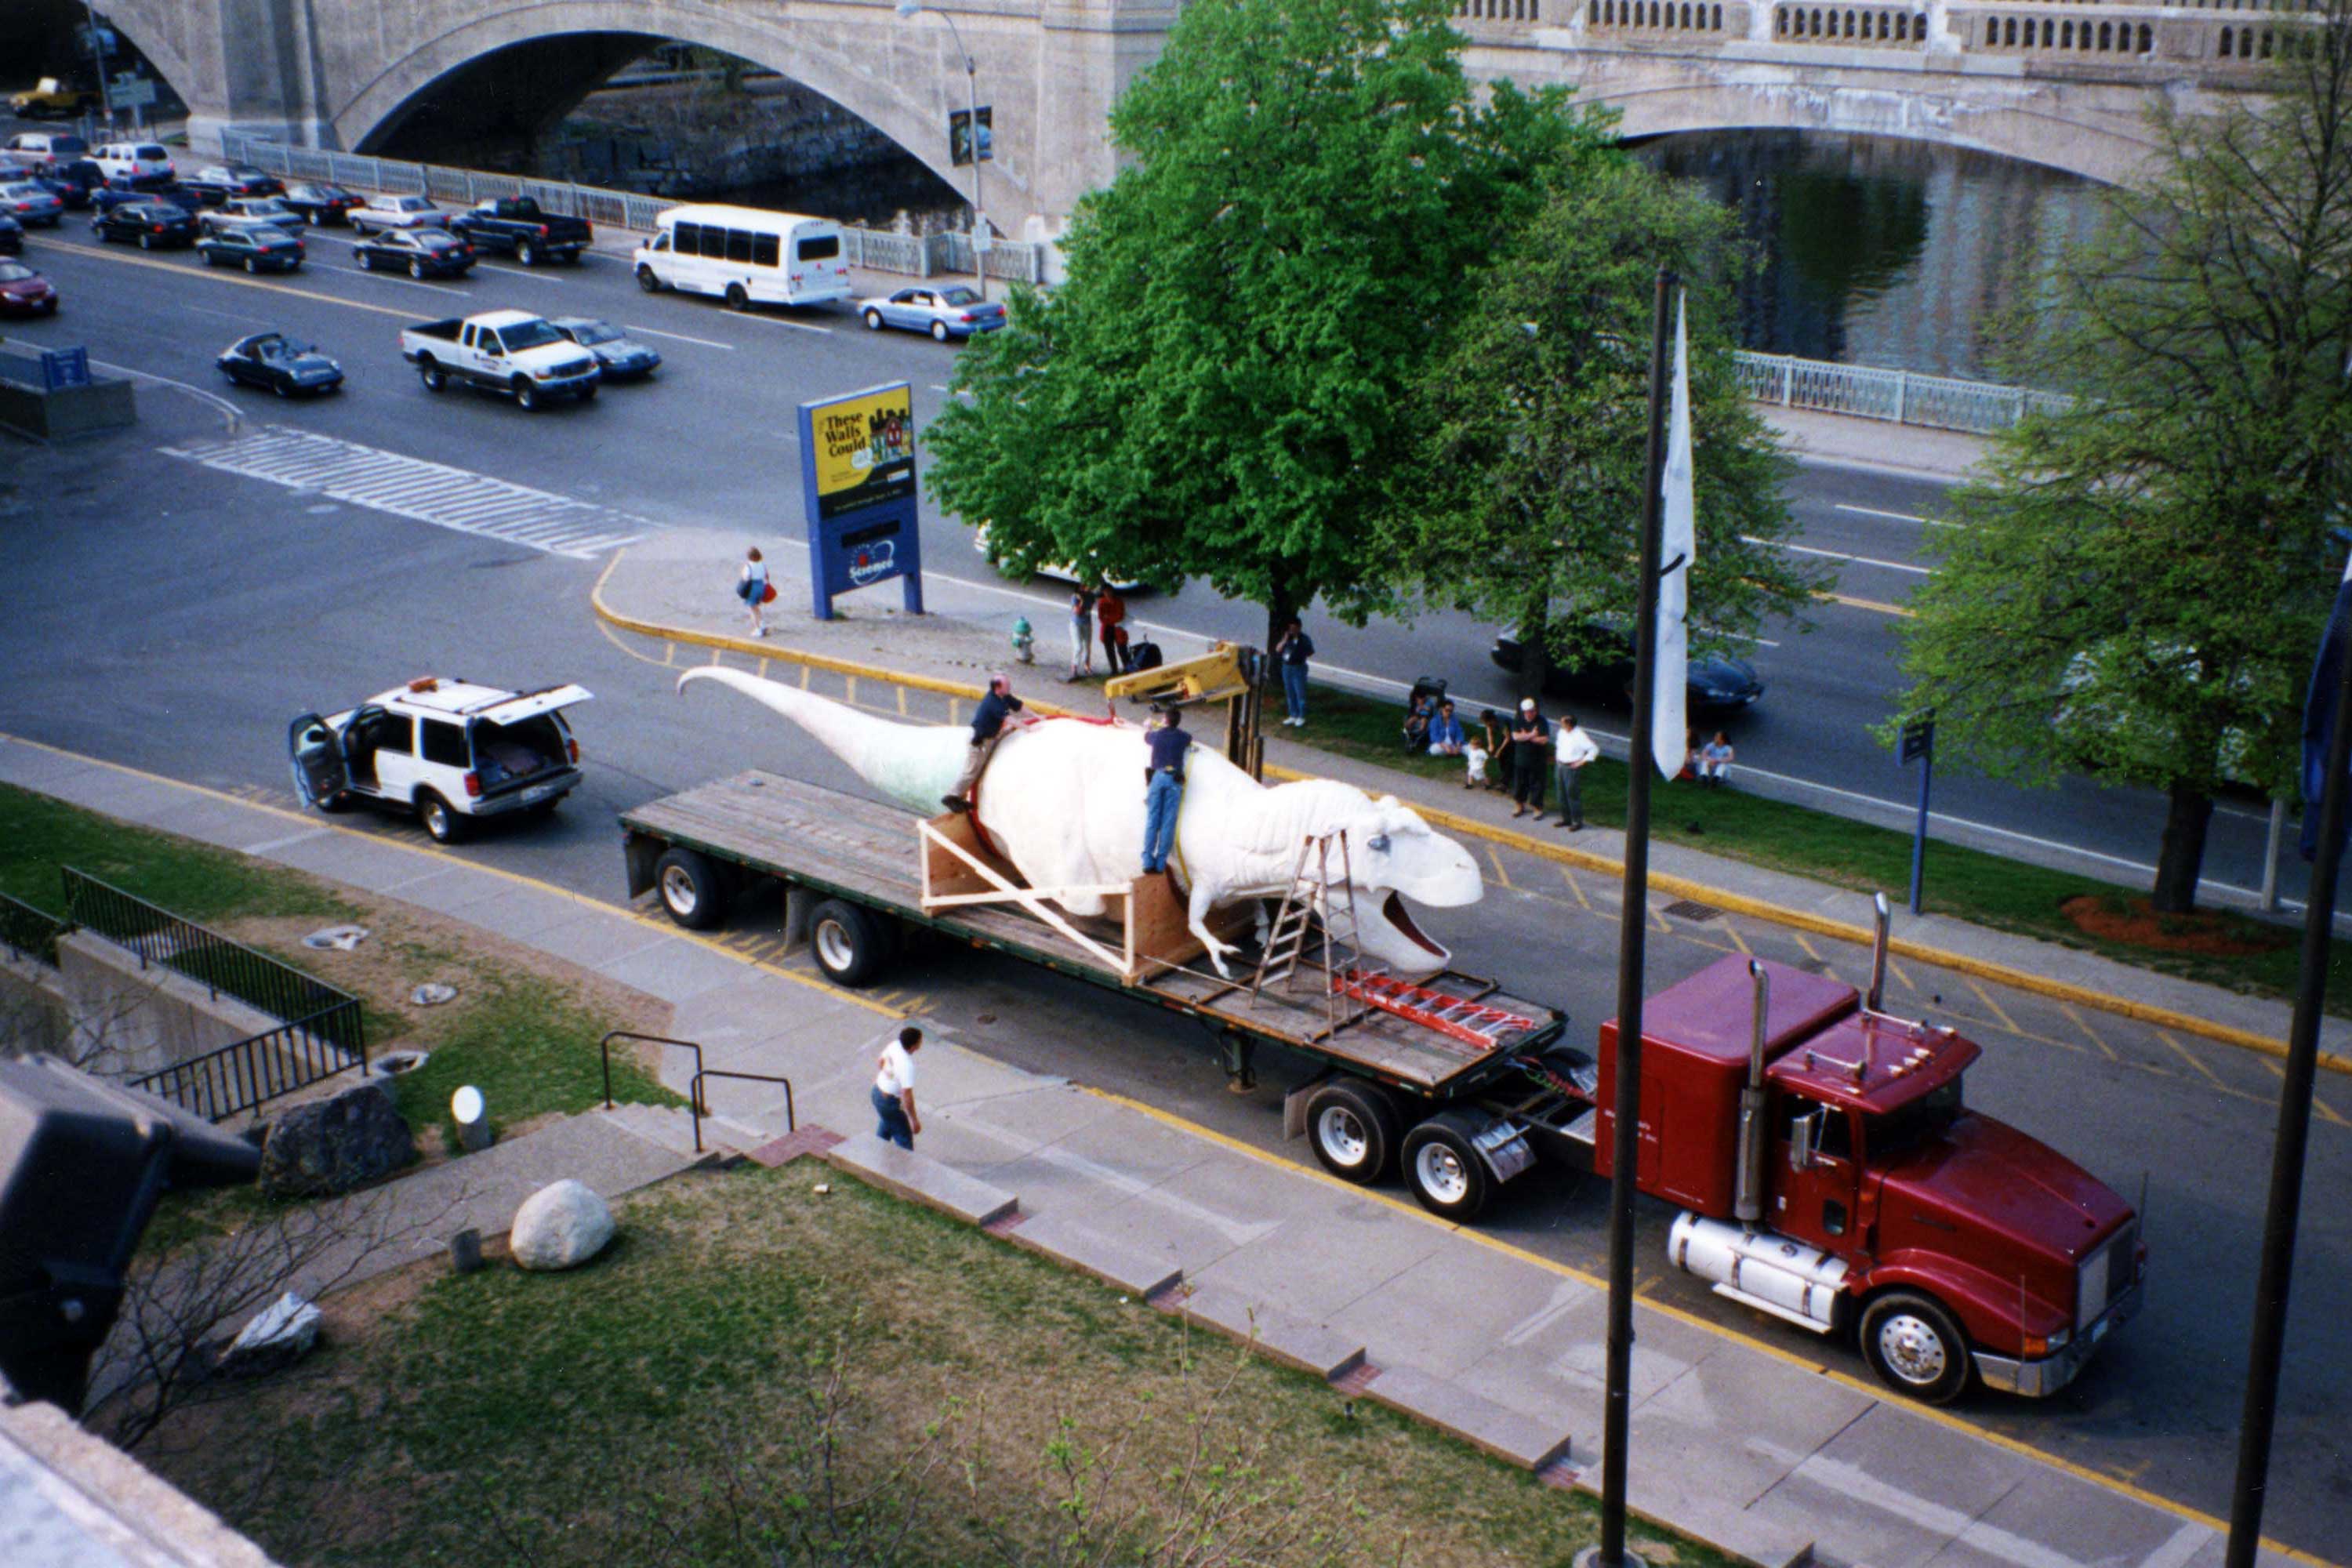 Current Model T.rex Delivery. This is a photograph of a life-size T. Rex model on a trailer that is partially built and unpainted.